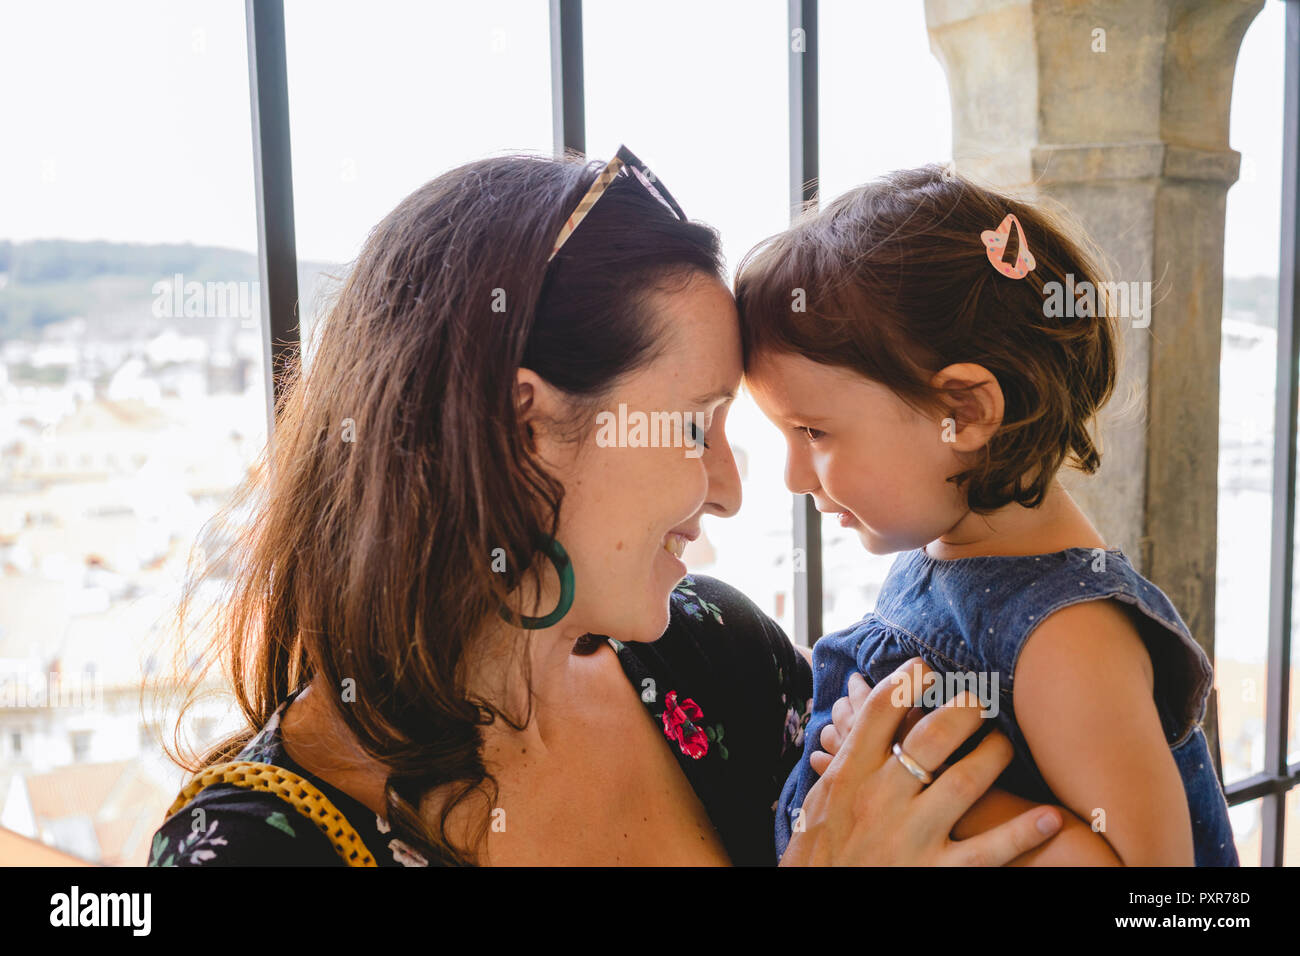 Czechia, Prague, happy mother head to head with her little daughter Stock Photo